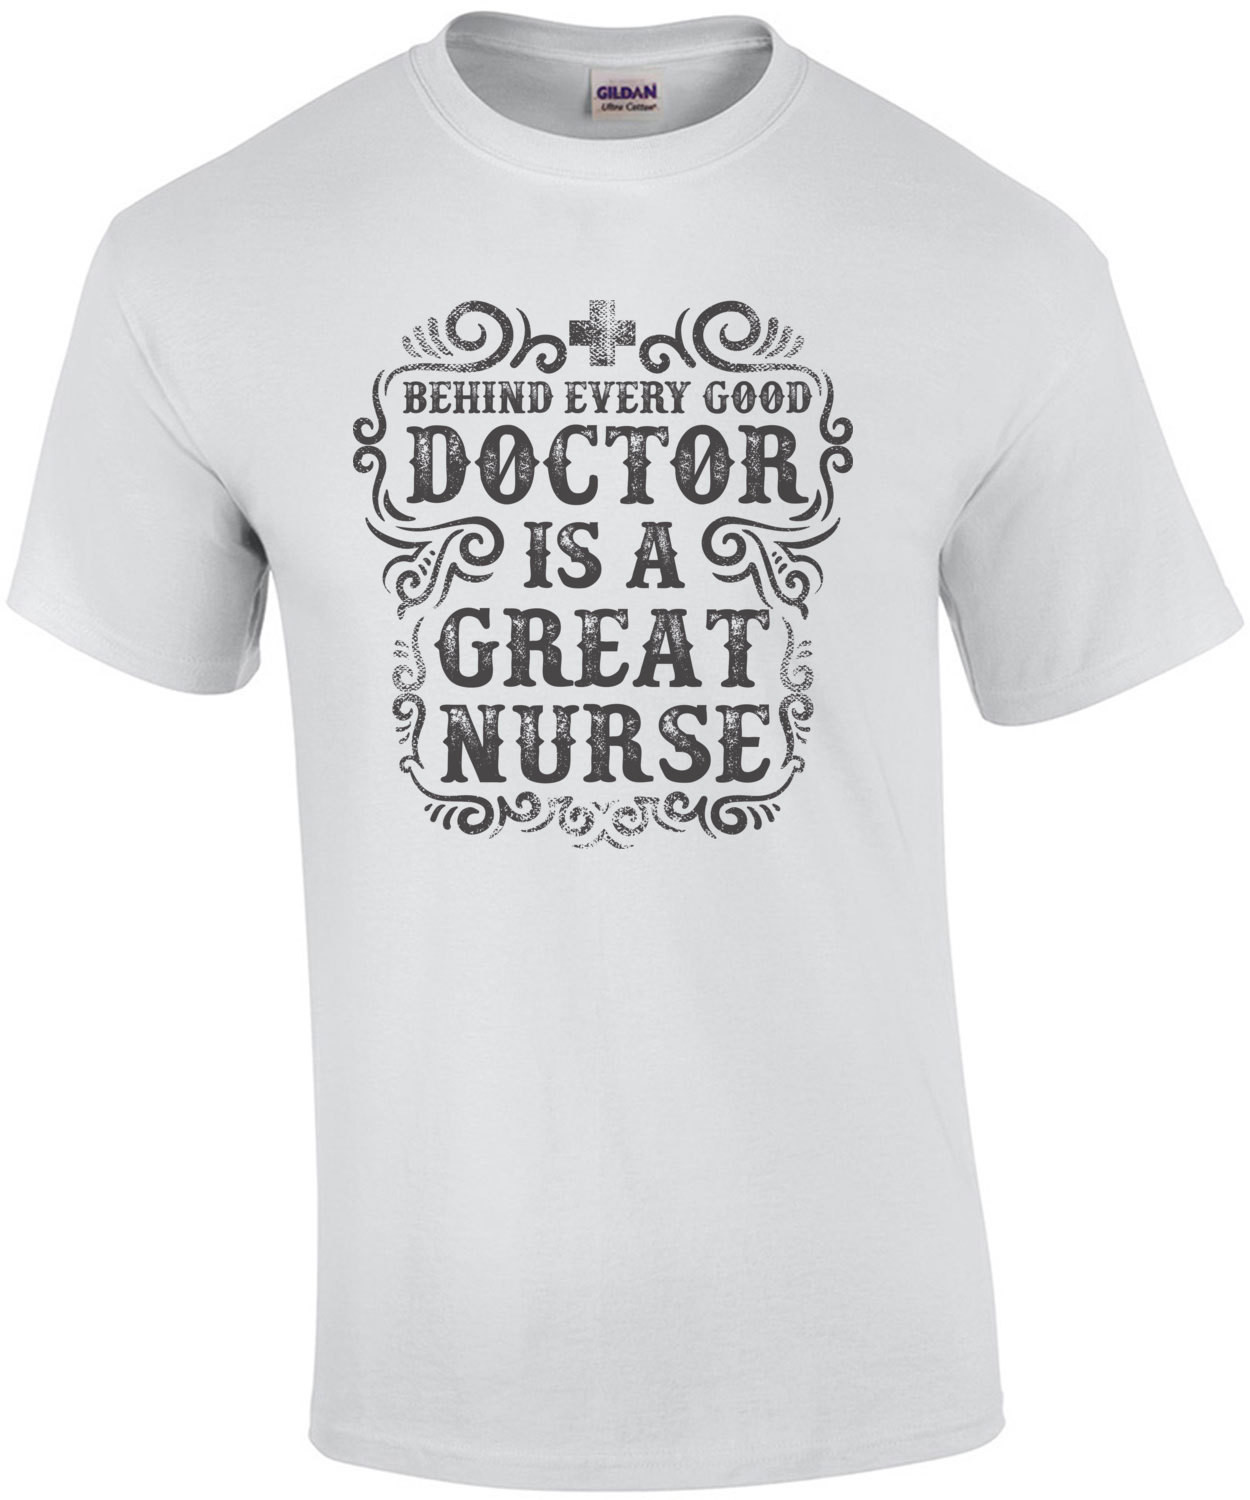 Behind Every Good Doctor Is A Great Nurse T-Shirt